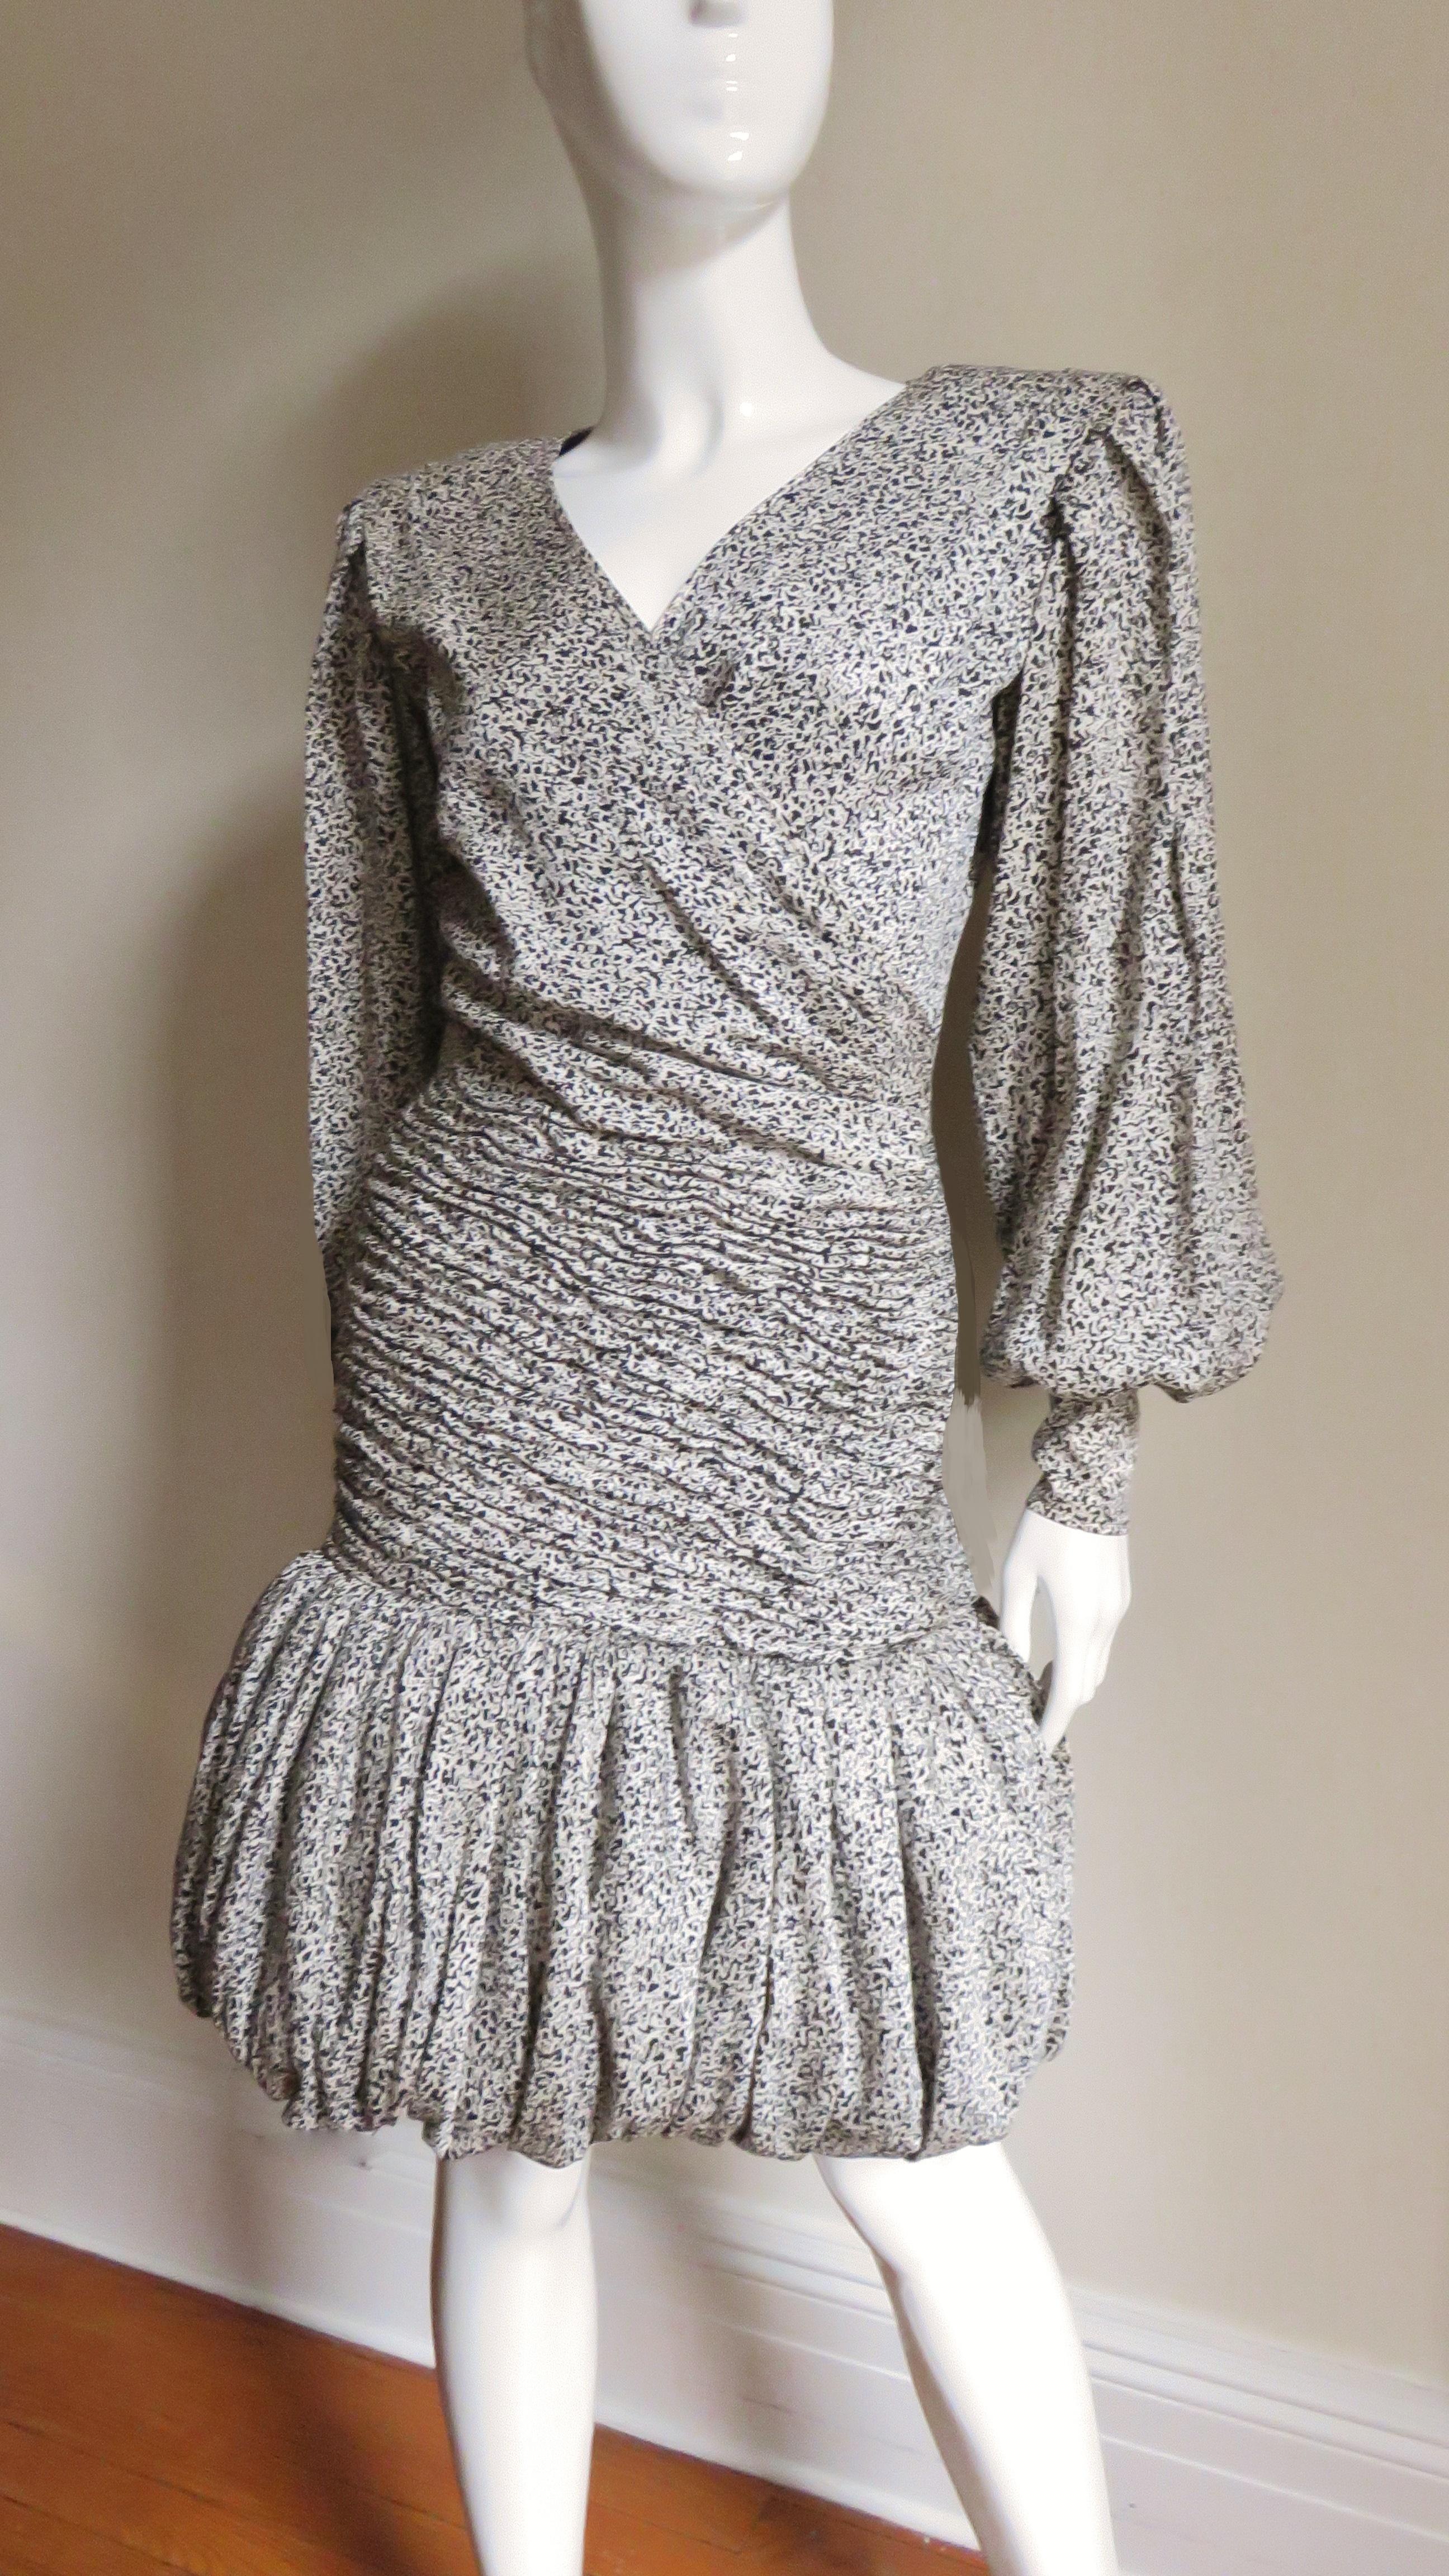 Emanuel Ungaro Silk Dress 1980s In Excellent Condition For Sale In Water Mill, NY